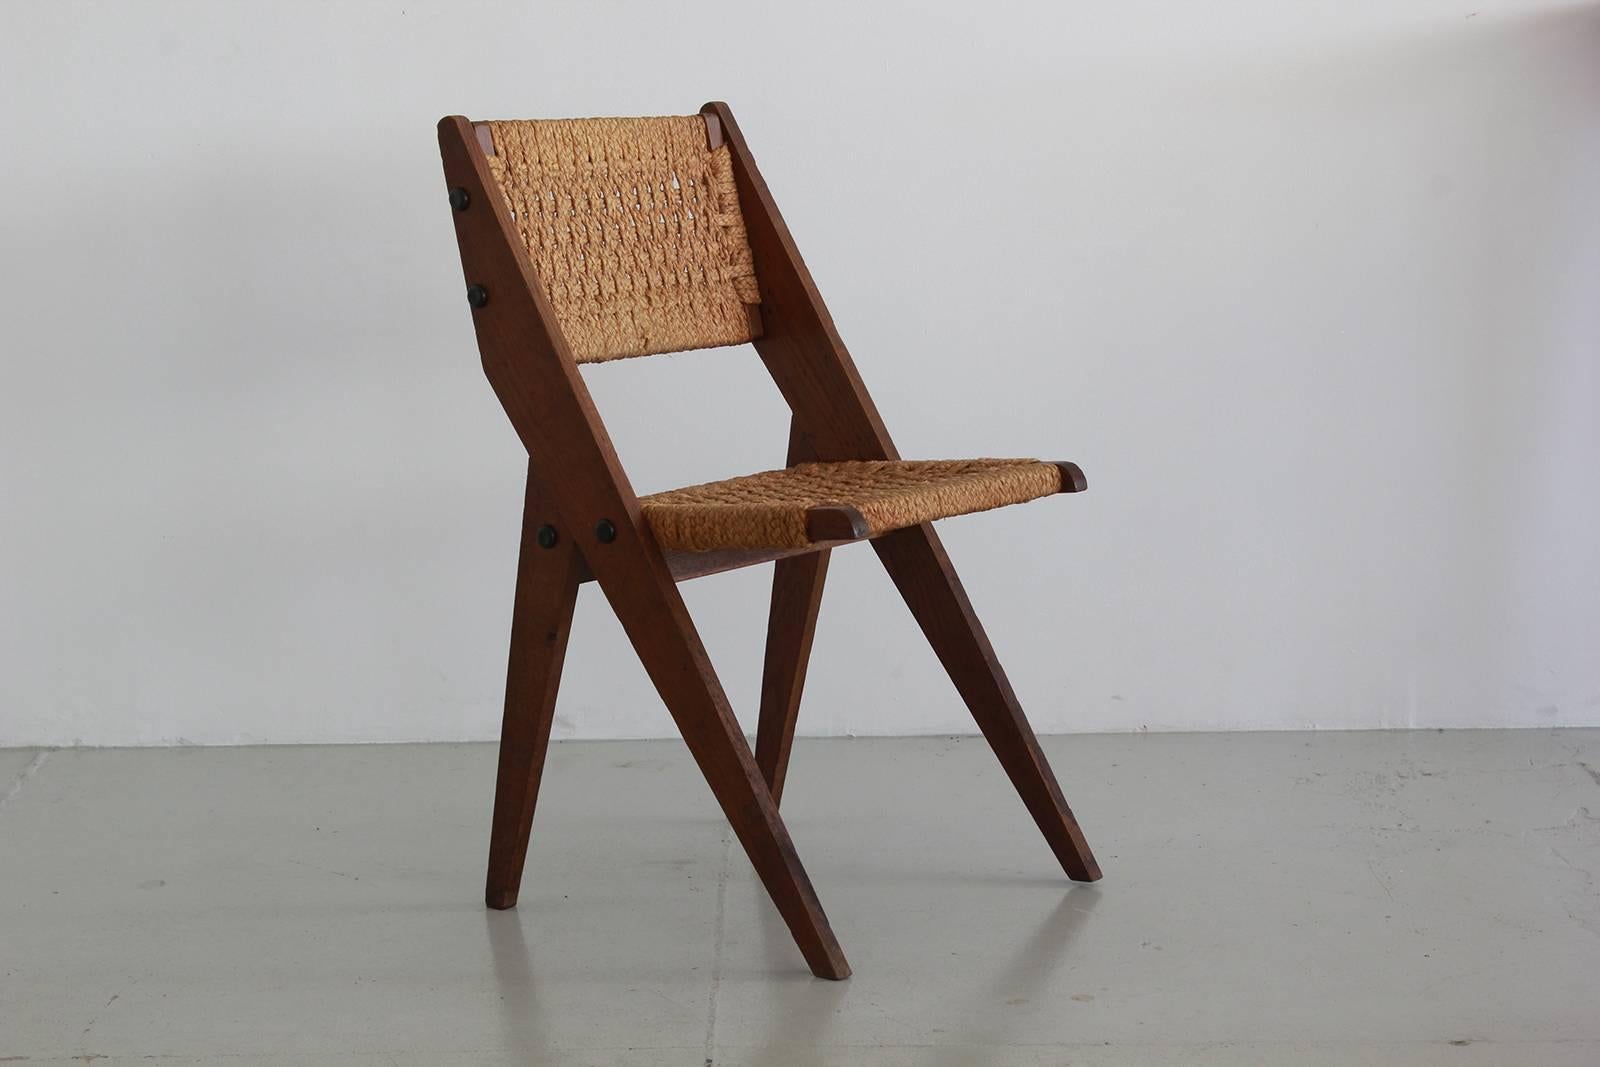 Beautiful French chair by Audoux-Minet. One available.
Woven seat and back with sculptural scissor shape.